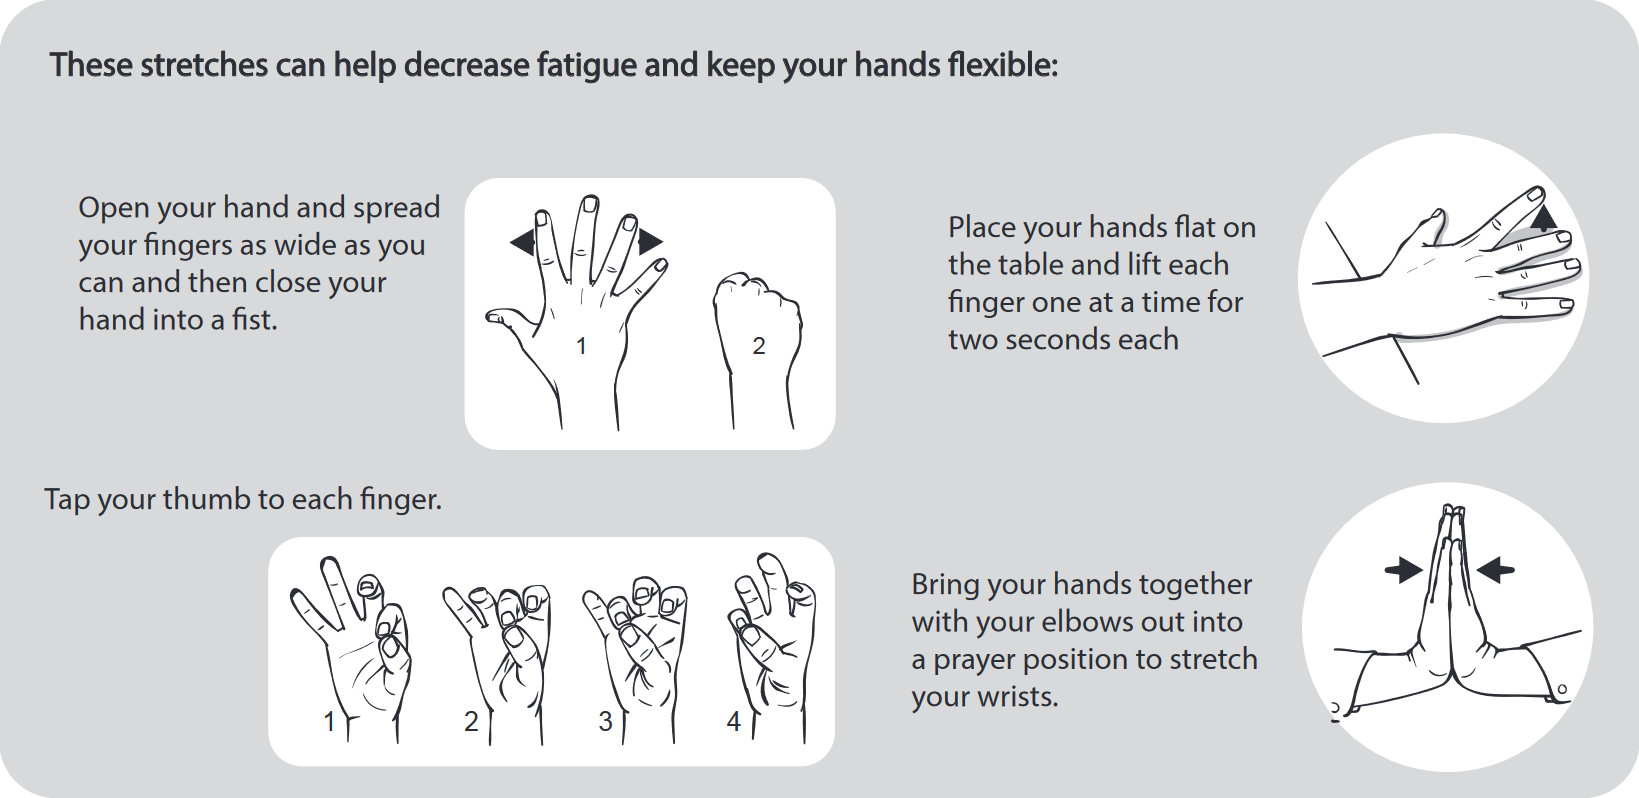 Various RSI exercises. In order: open your hand and spread your fingers as wide as you can and then close your hand into a fist; place your hands flat on the table and life each finger one at a time for two secons each; tap your thumb to each finger; bring your hands together with your elbows out into a prayer position to stretch your wrists.